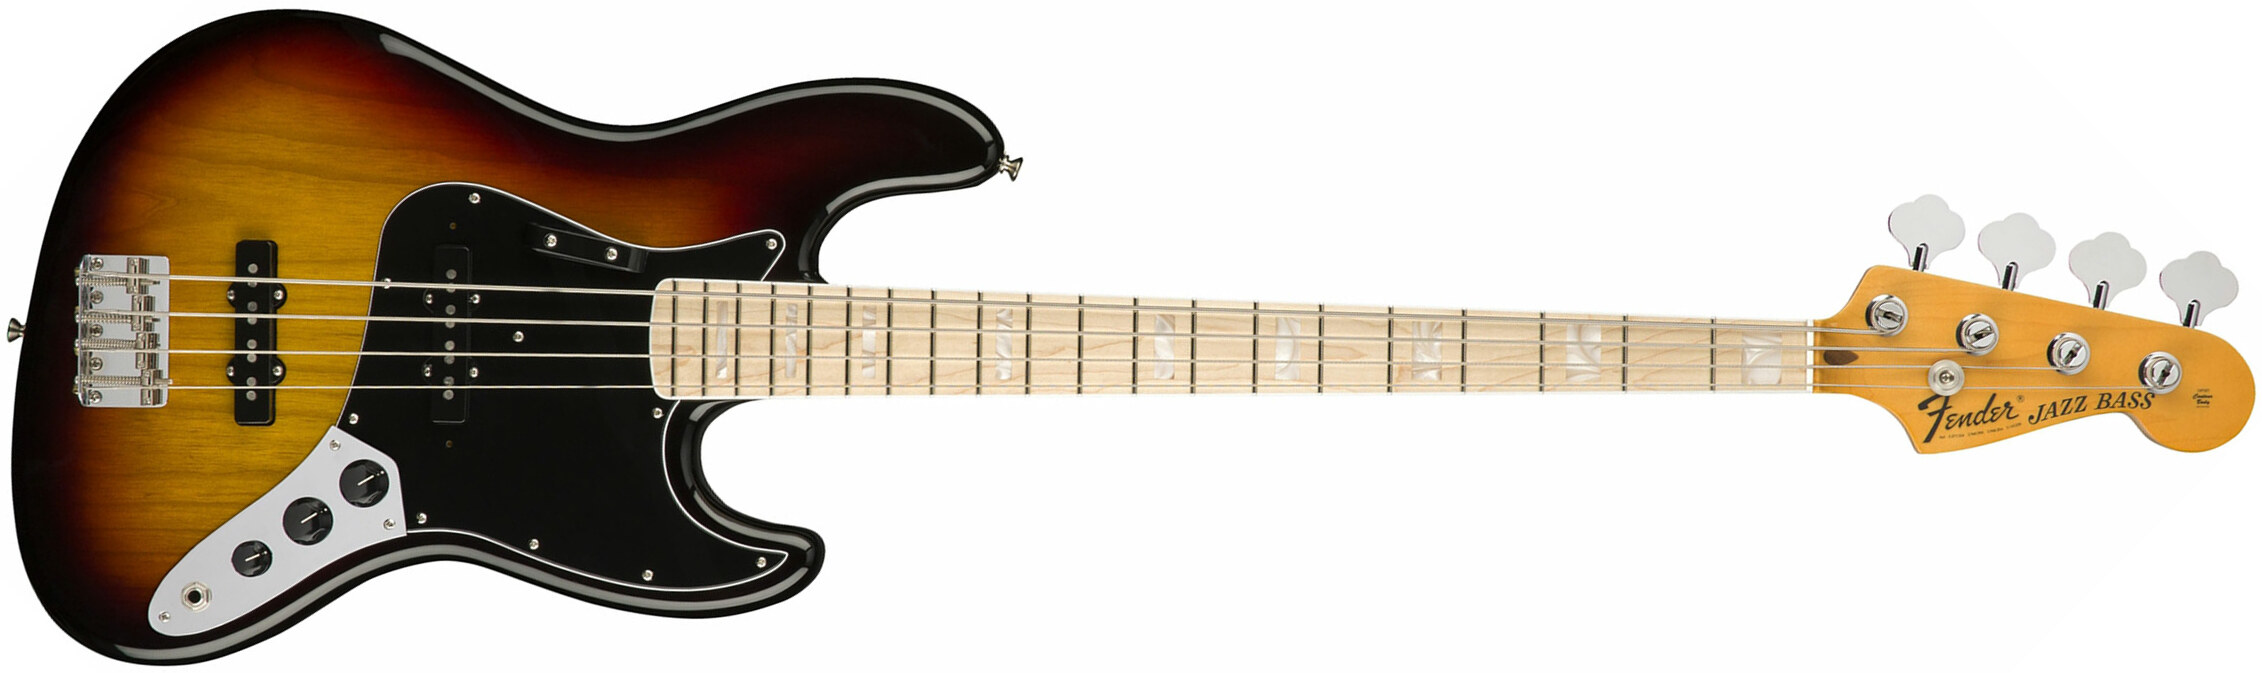 Fender Jazz Bass '70s American Original Usa Mn - 3-color Sunburst - Solid body electric bass - Main picture